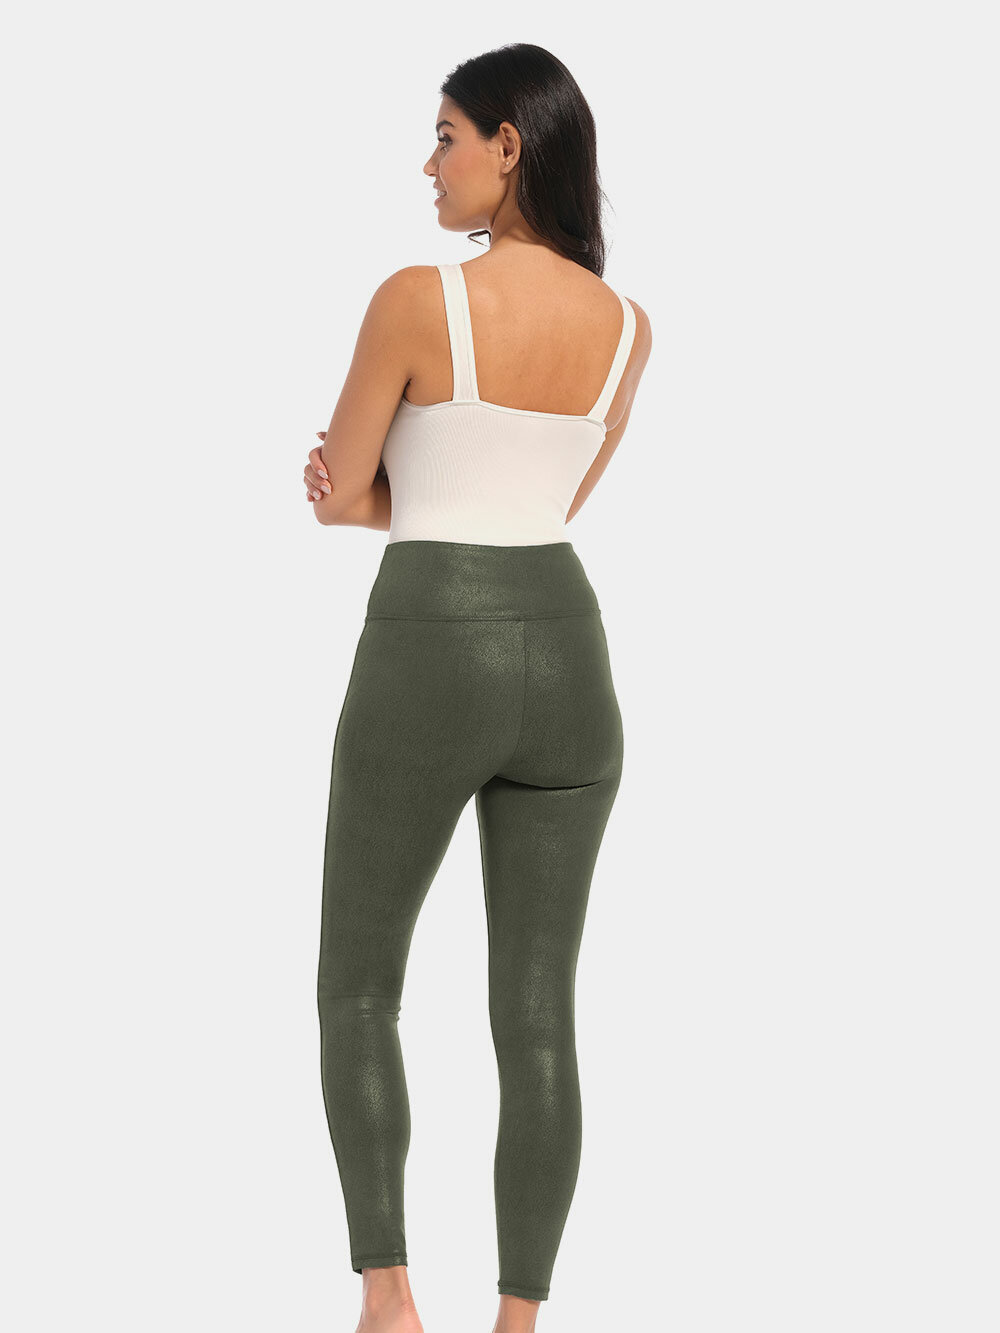 Leather pants for women Sexy Leggings Plus Size Color Bottom Small